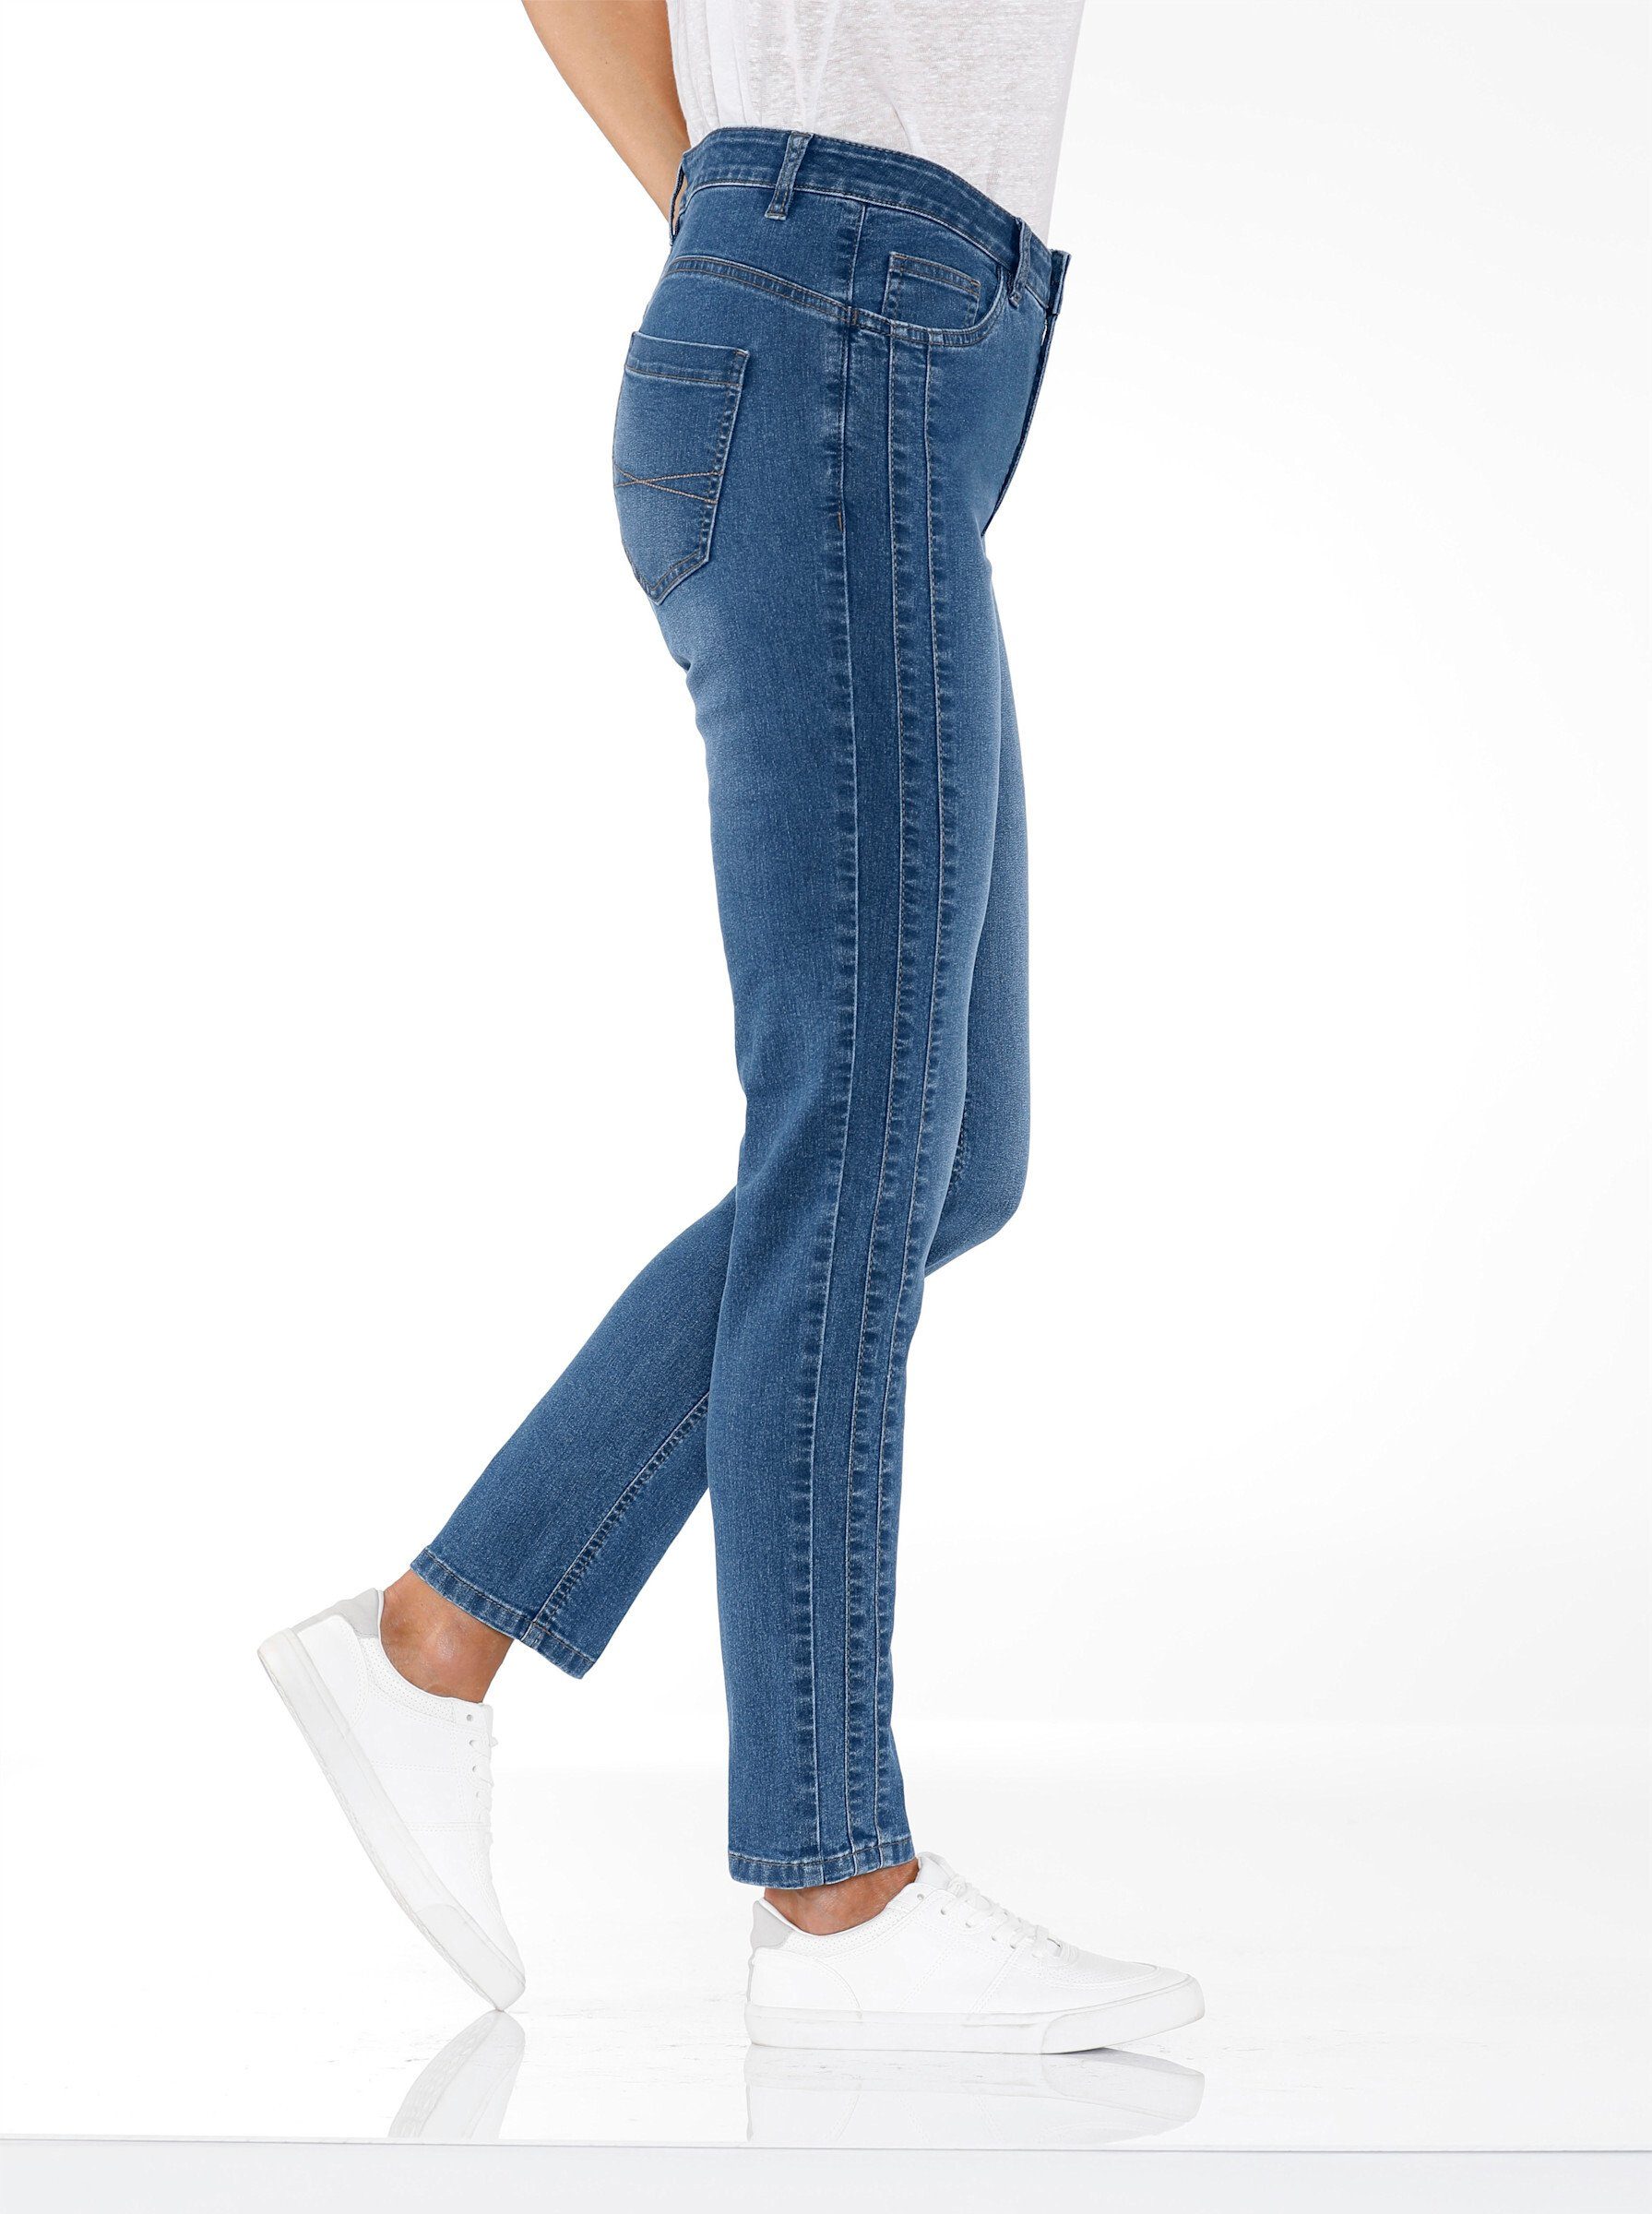 Sieh Jeans Bequeme blue-stone-washed an!